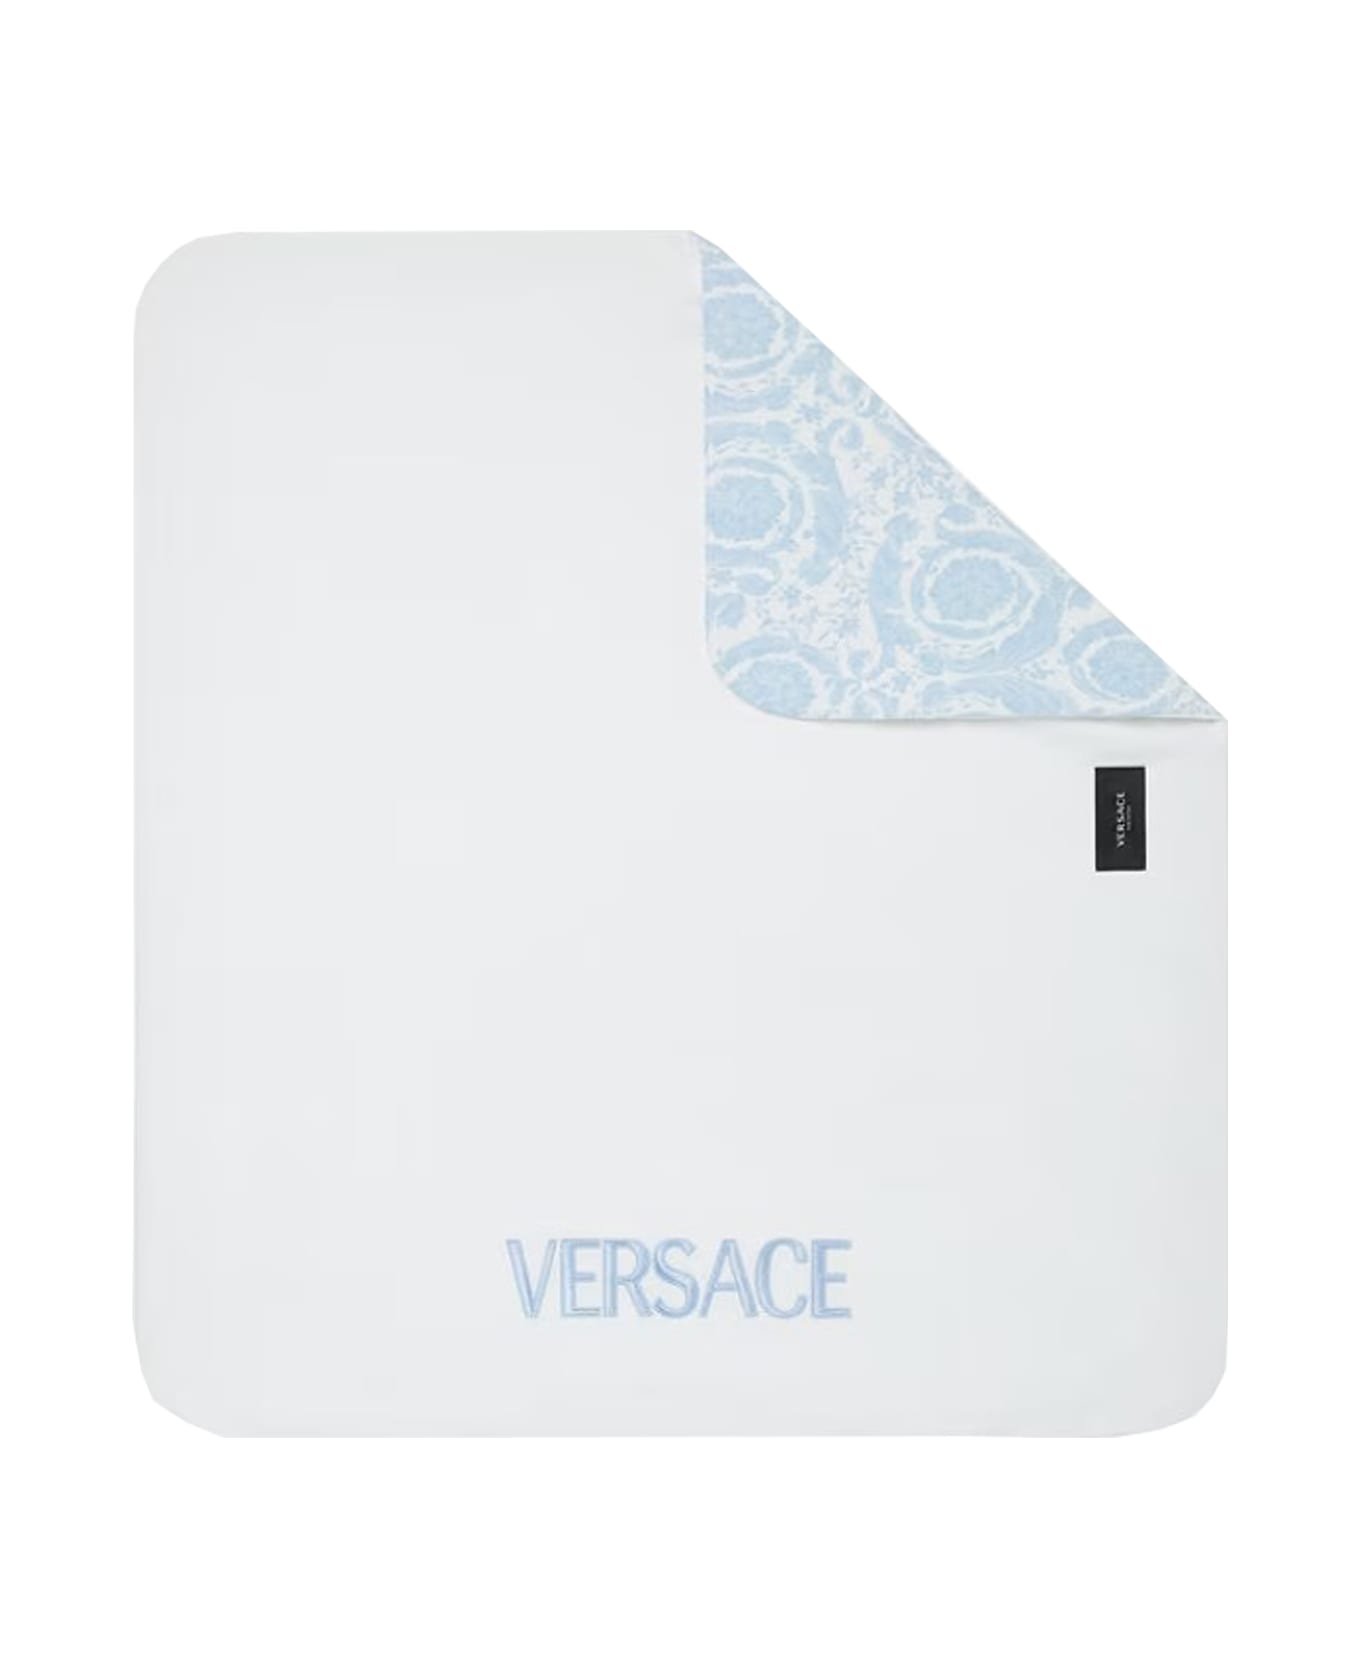 Versace Barocco Padded Baby Blanket - Light blue アクセサリー＆ギフト